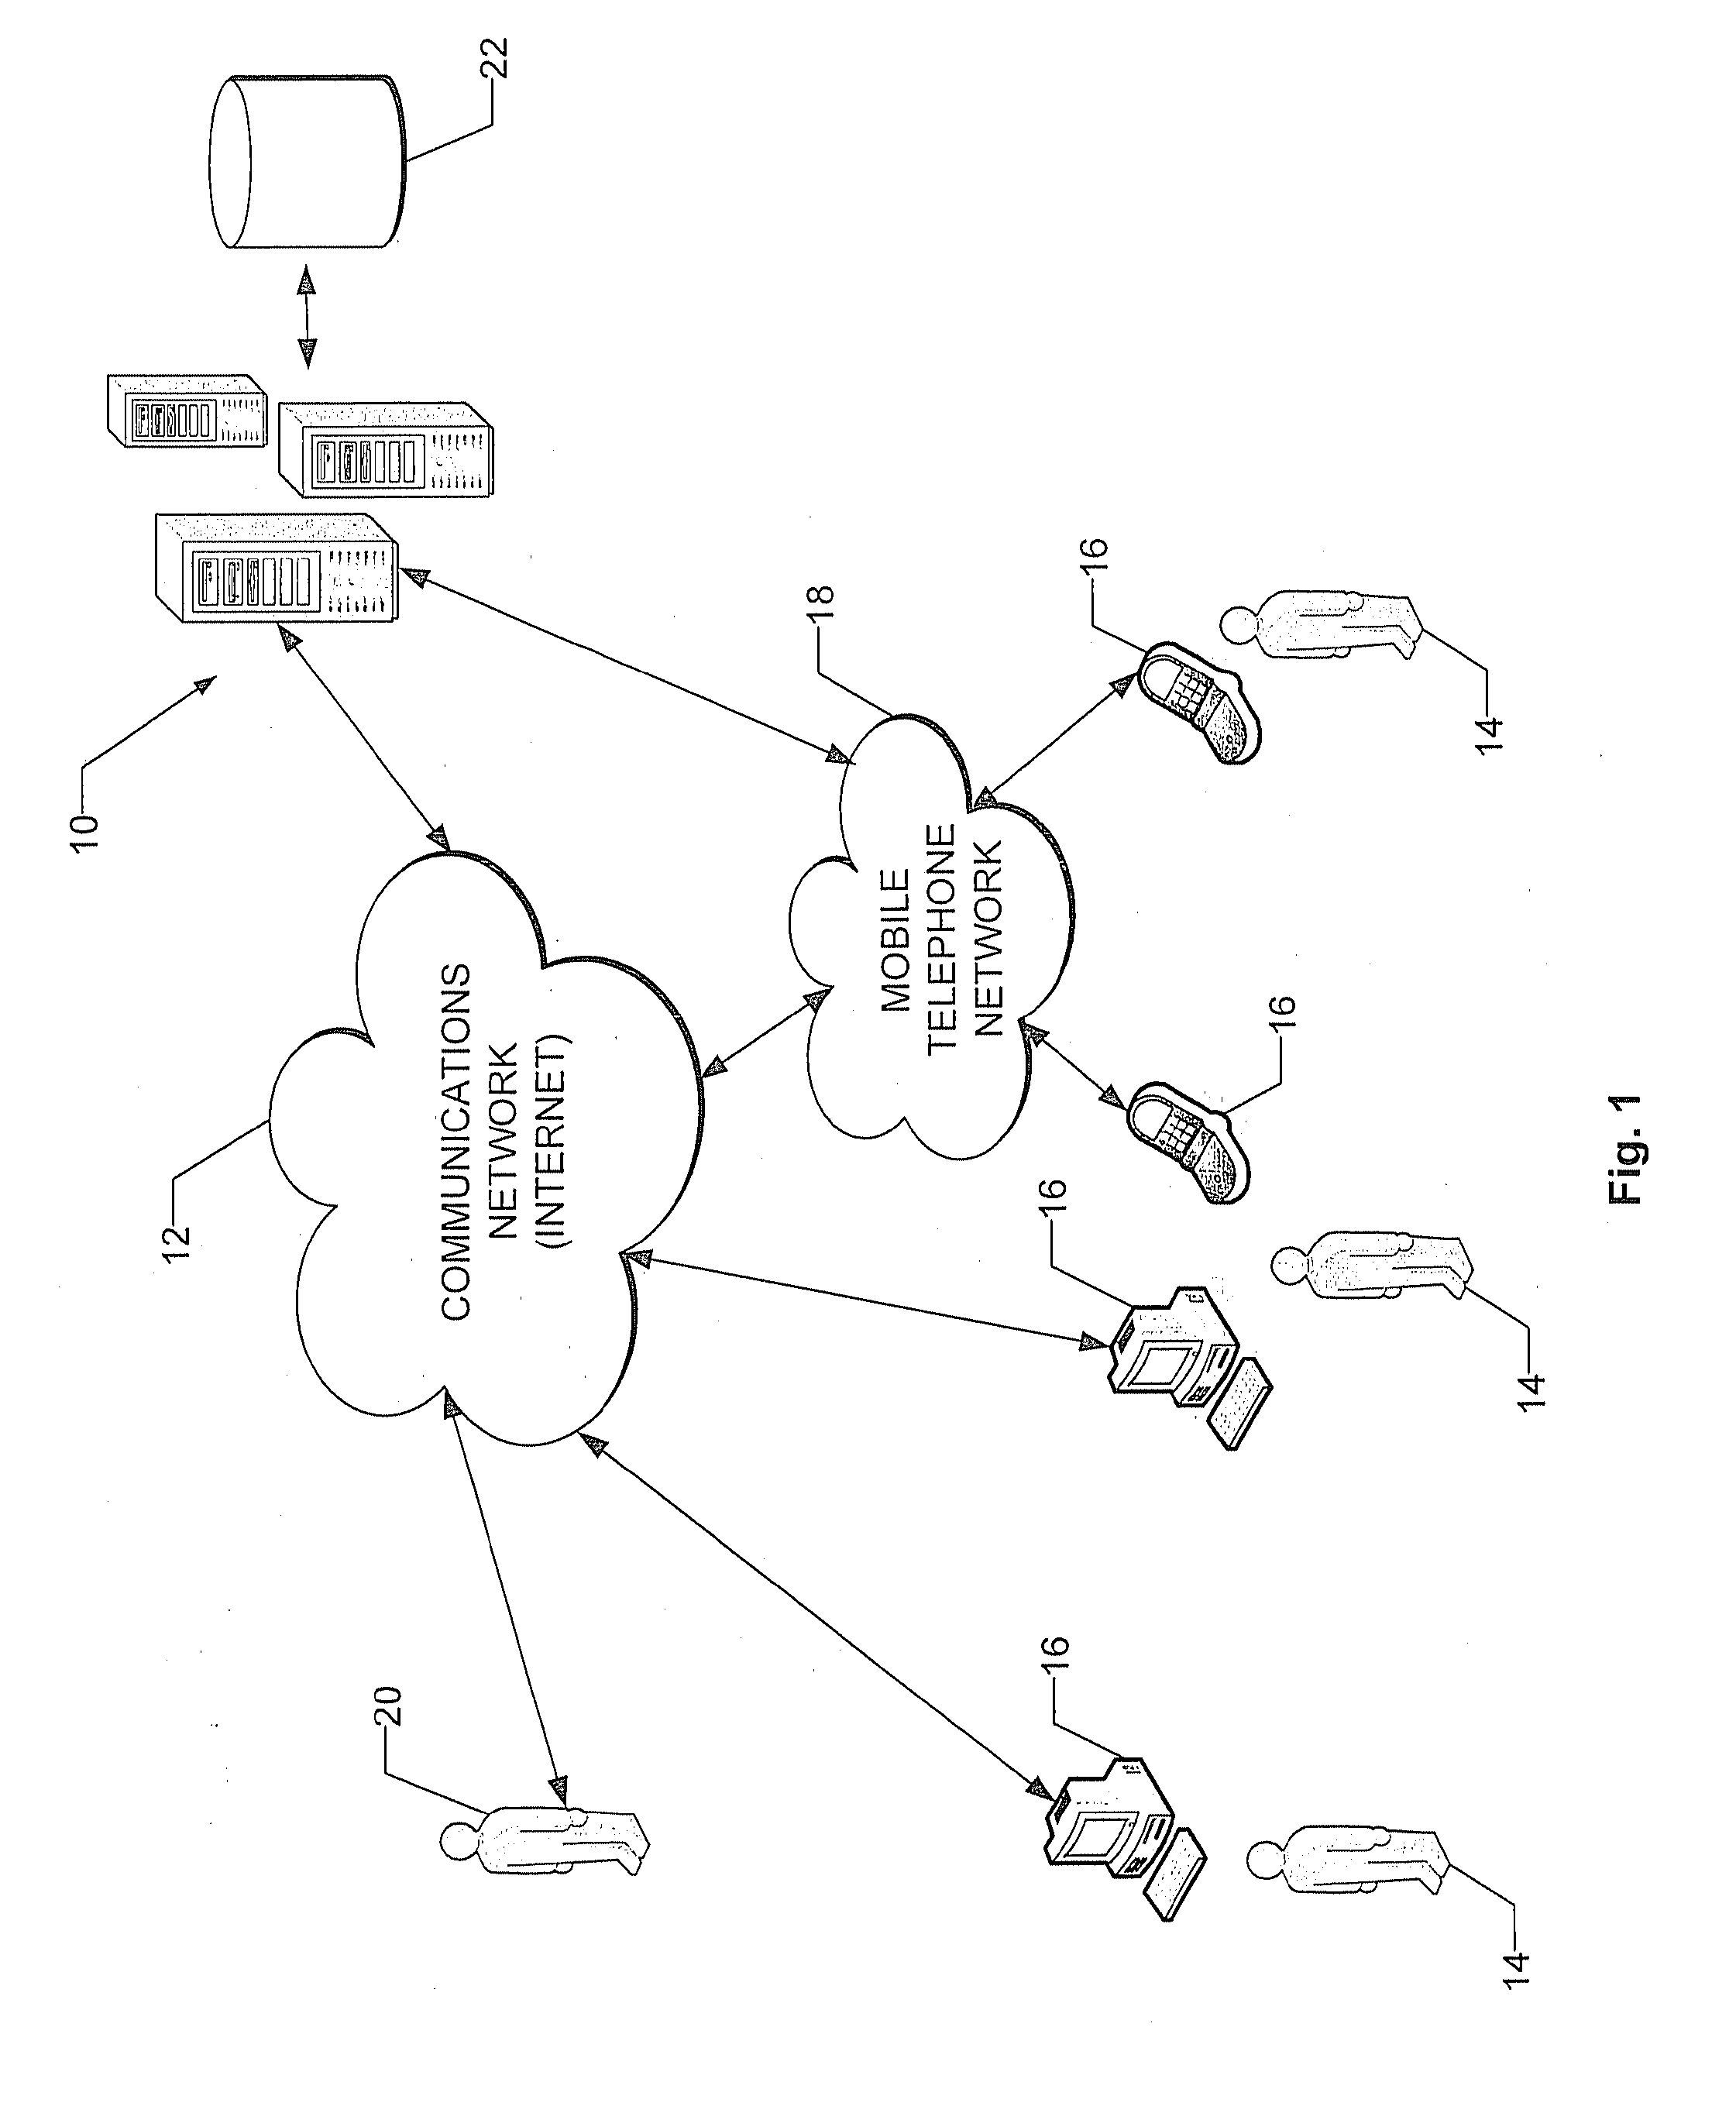 Financial Practice Management System and Method